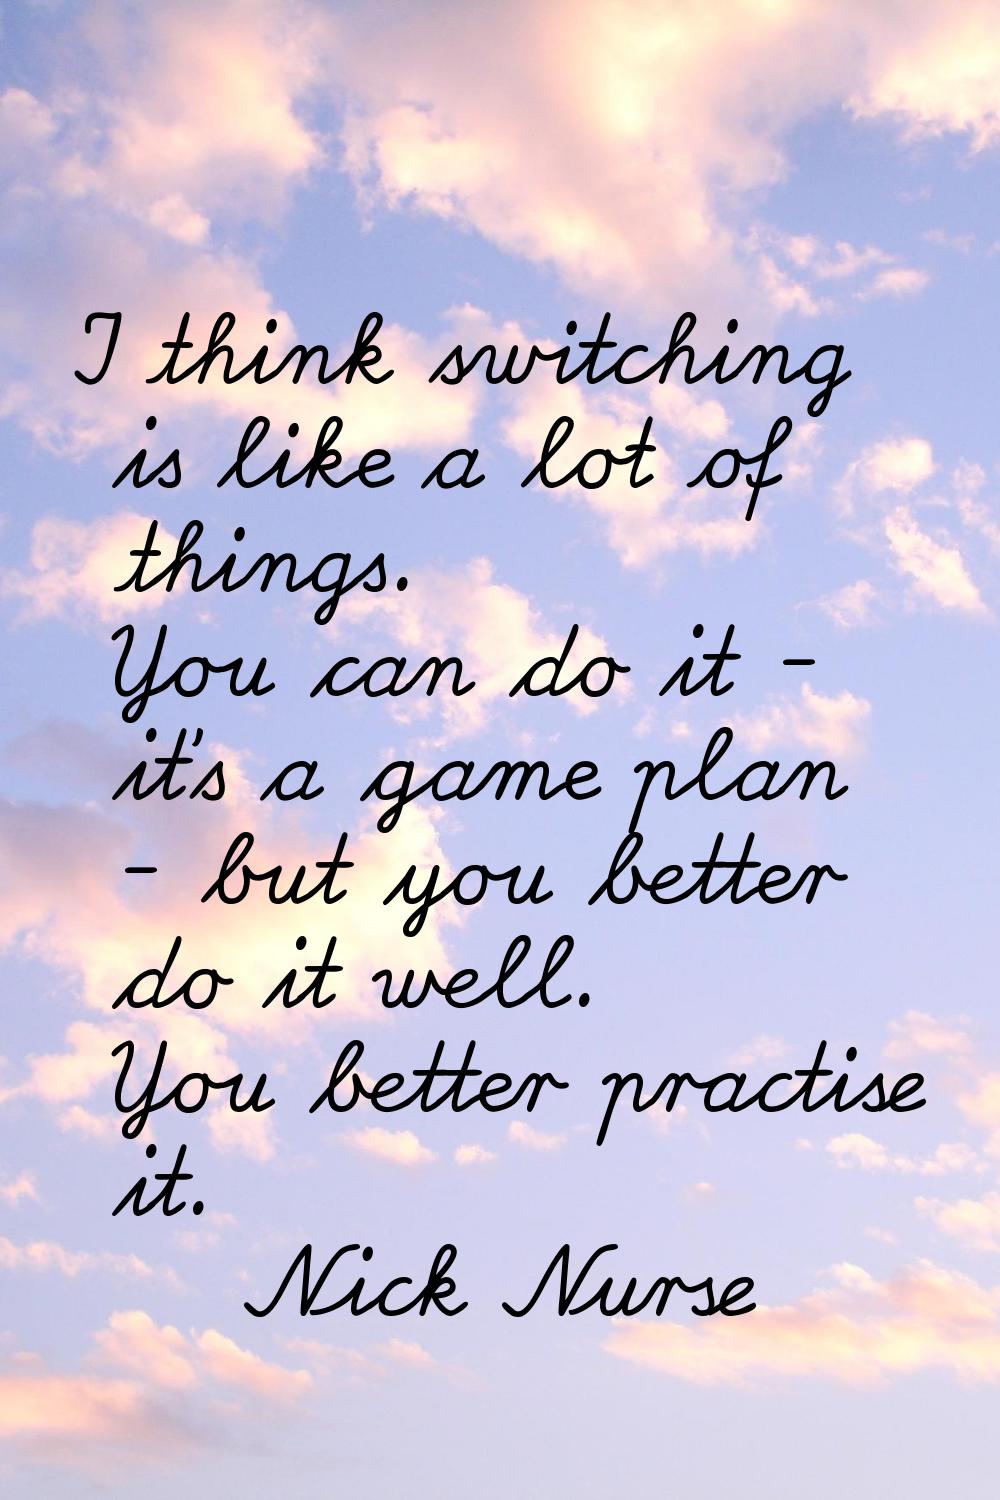 I think switching is like a lot of things. You can do it - it's a game plan - but you better do it 